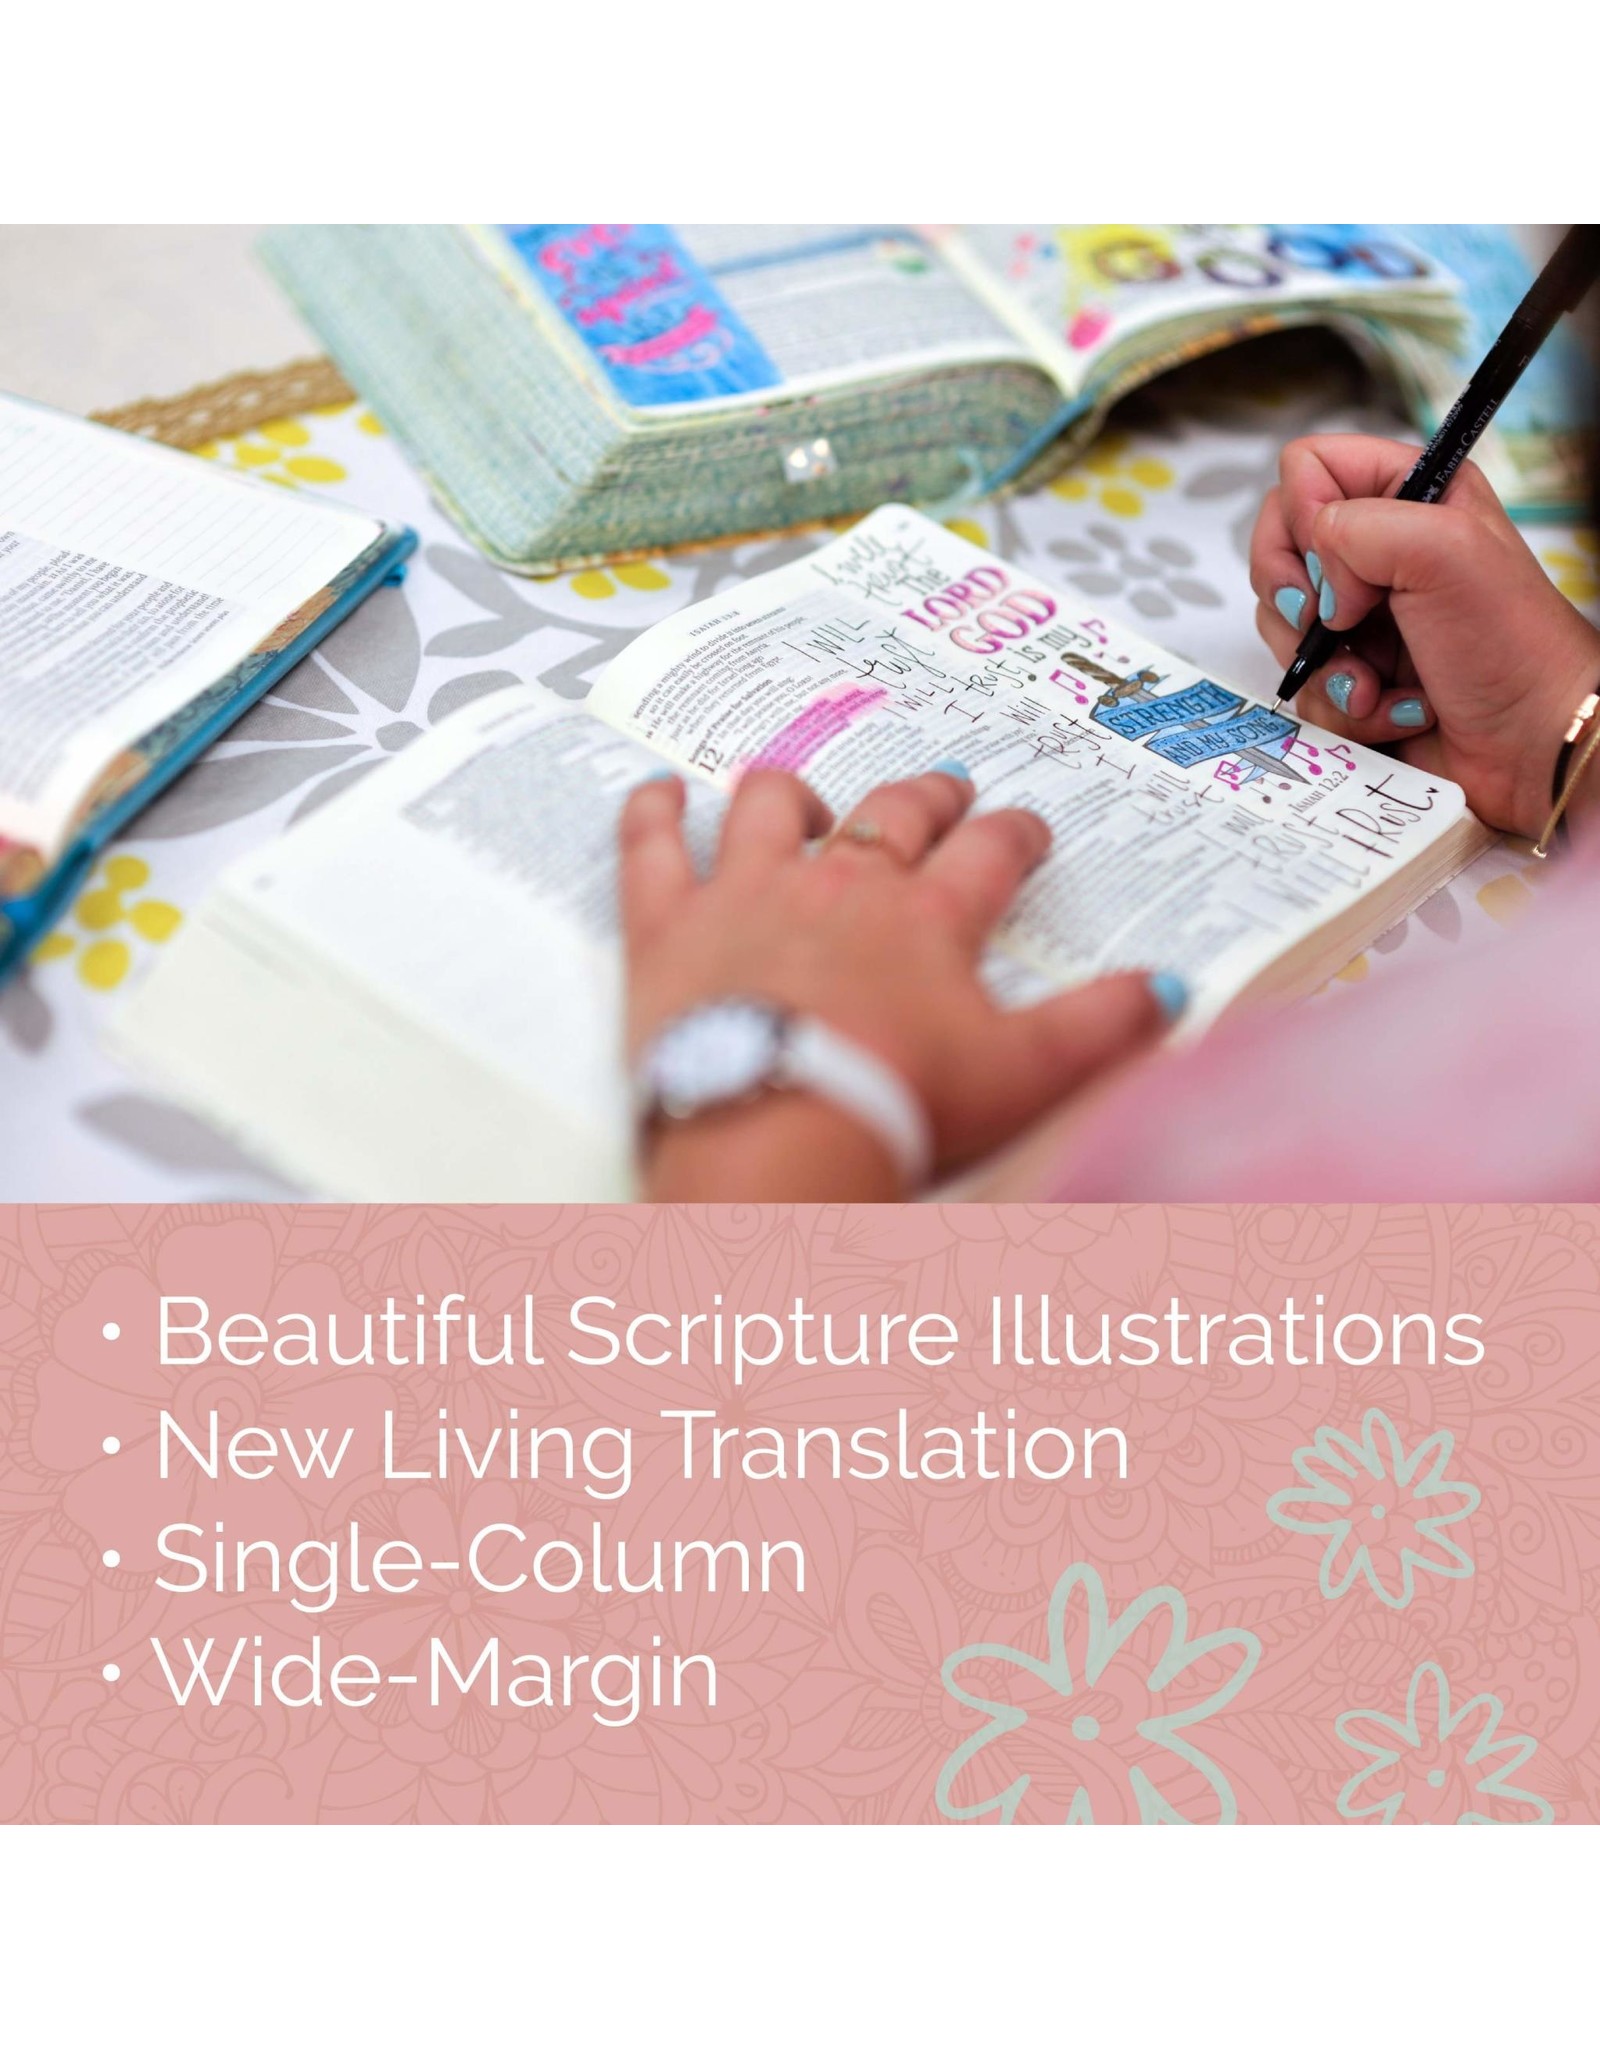 Tyndale Inspire Catholic Bible NLT: The Bible for Coloring & Creative Journaling